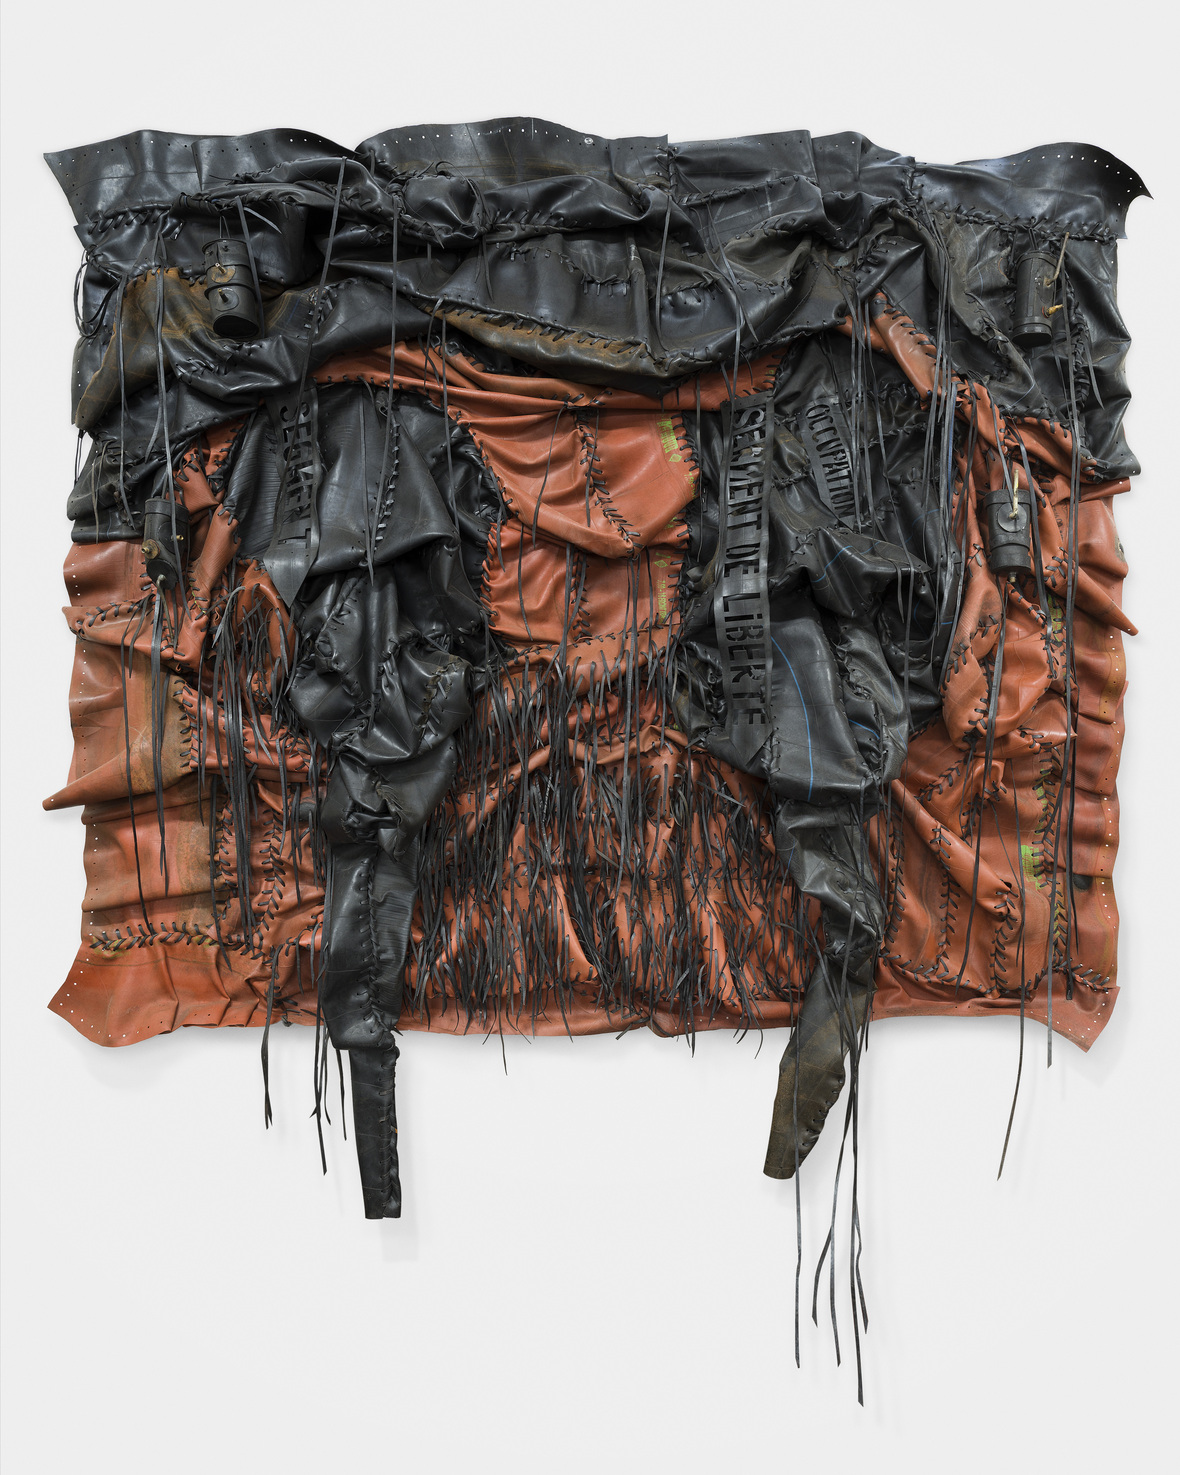 Patrick Bongoy, Eroded, 2020, Recycled inner rubber tube, valves, Size: 250 x 265 cm, Price: USD 20000, Presented by EBONY/CURATED. ENQUIRE.